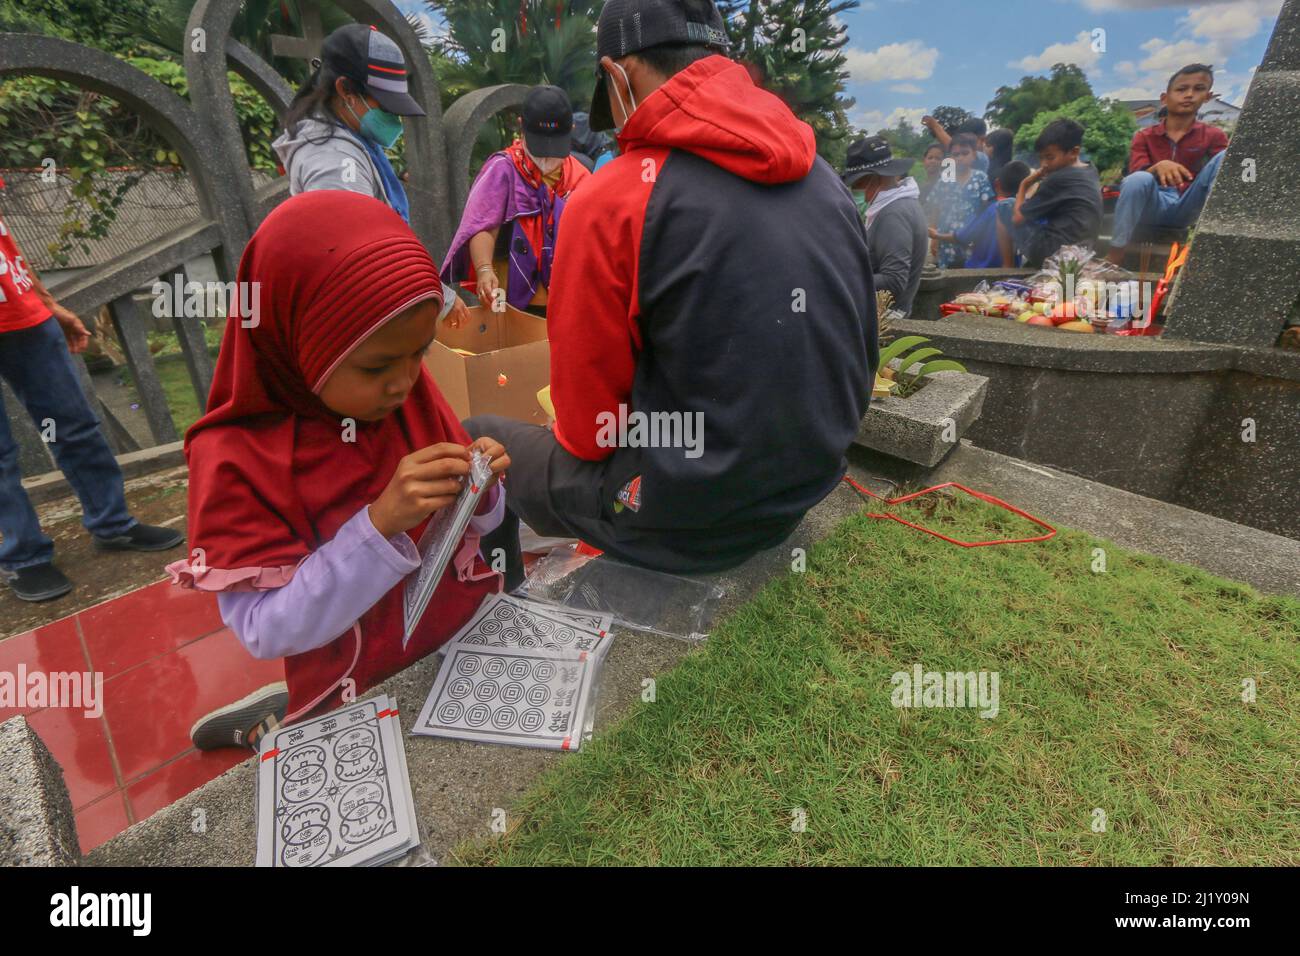 A young girl help prepare during the Cheng Beng or Qingming Festival, also known as Tomb Sweeping Day, at a Chinese cemetery in Bogor, West Java, Indonesia on March 27, 2021. The Qingming Festival or Cheng Beng is an annual Chinese ethnic ritual to remember, honor, and pilgrimage to the ancestors grave according to Confucianism. Everyone prays in front of the ancestors, sweeps the tomb and prays with incense, money, paper prayers and various accessories, as an offering to the ancestors. (Photo by Andi M Ridwan/INA Photo Agency/Sipa USA) Stock Photo